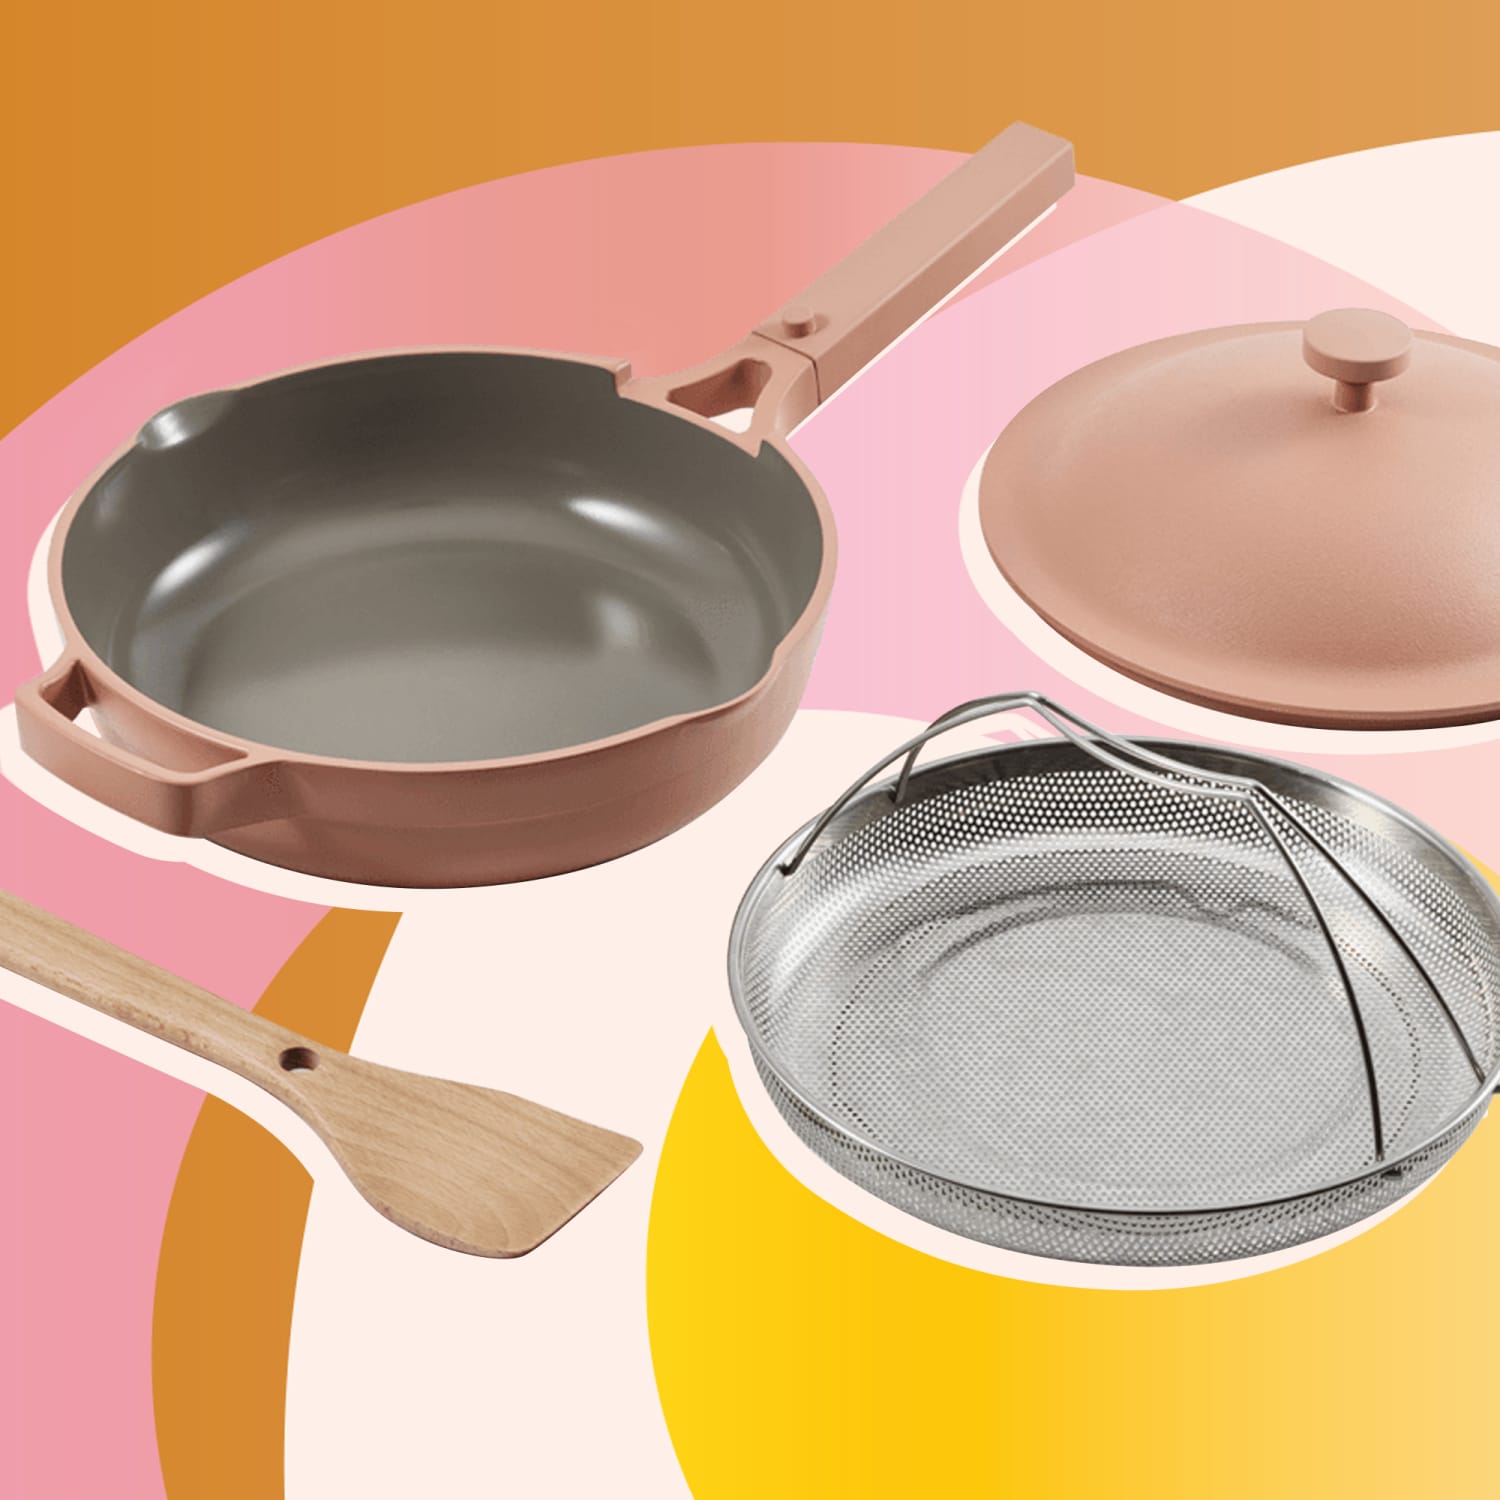 Our Place Always Pan Review - Is the Always Pan Worth It?